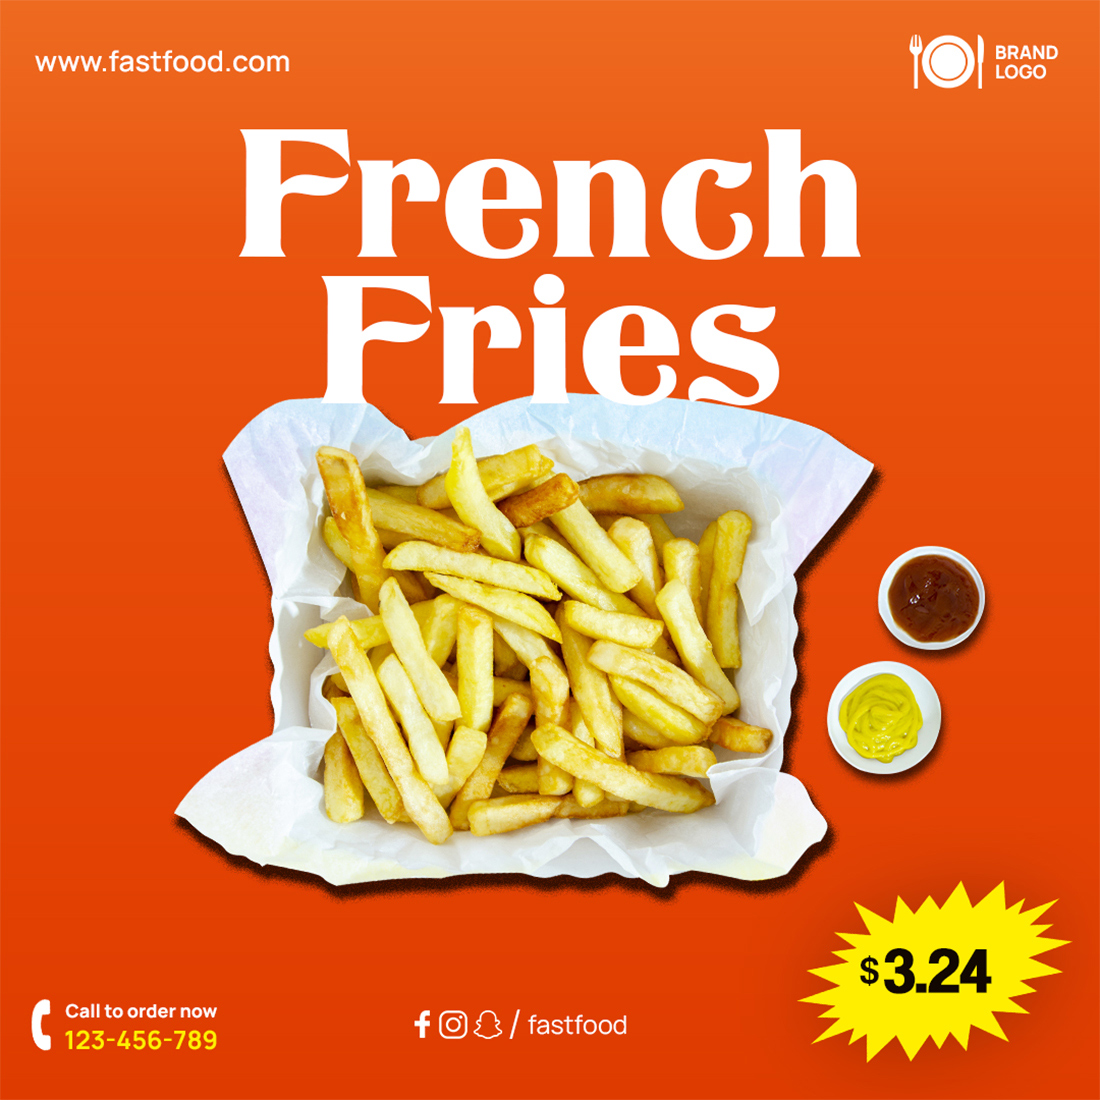 Delicious French Fries High-Resolution Social Media Banner Template cover image.